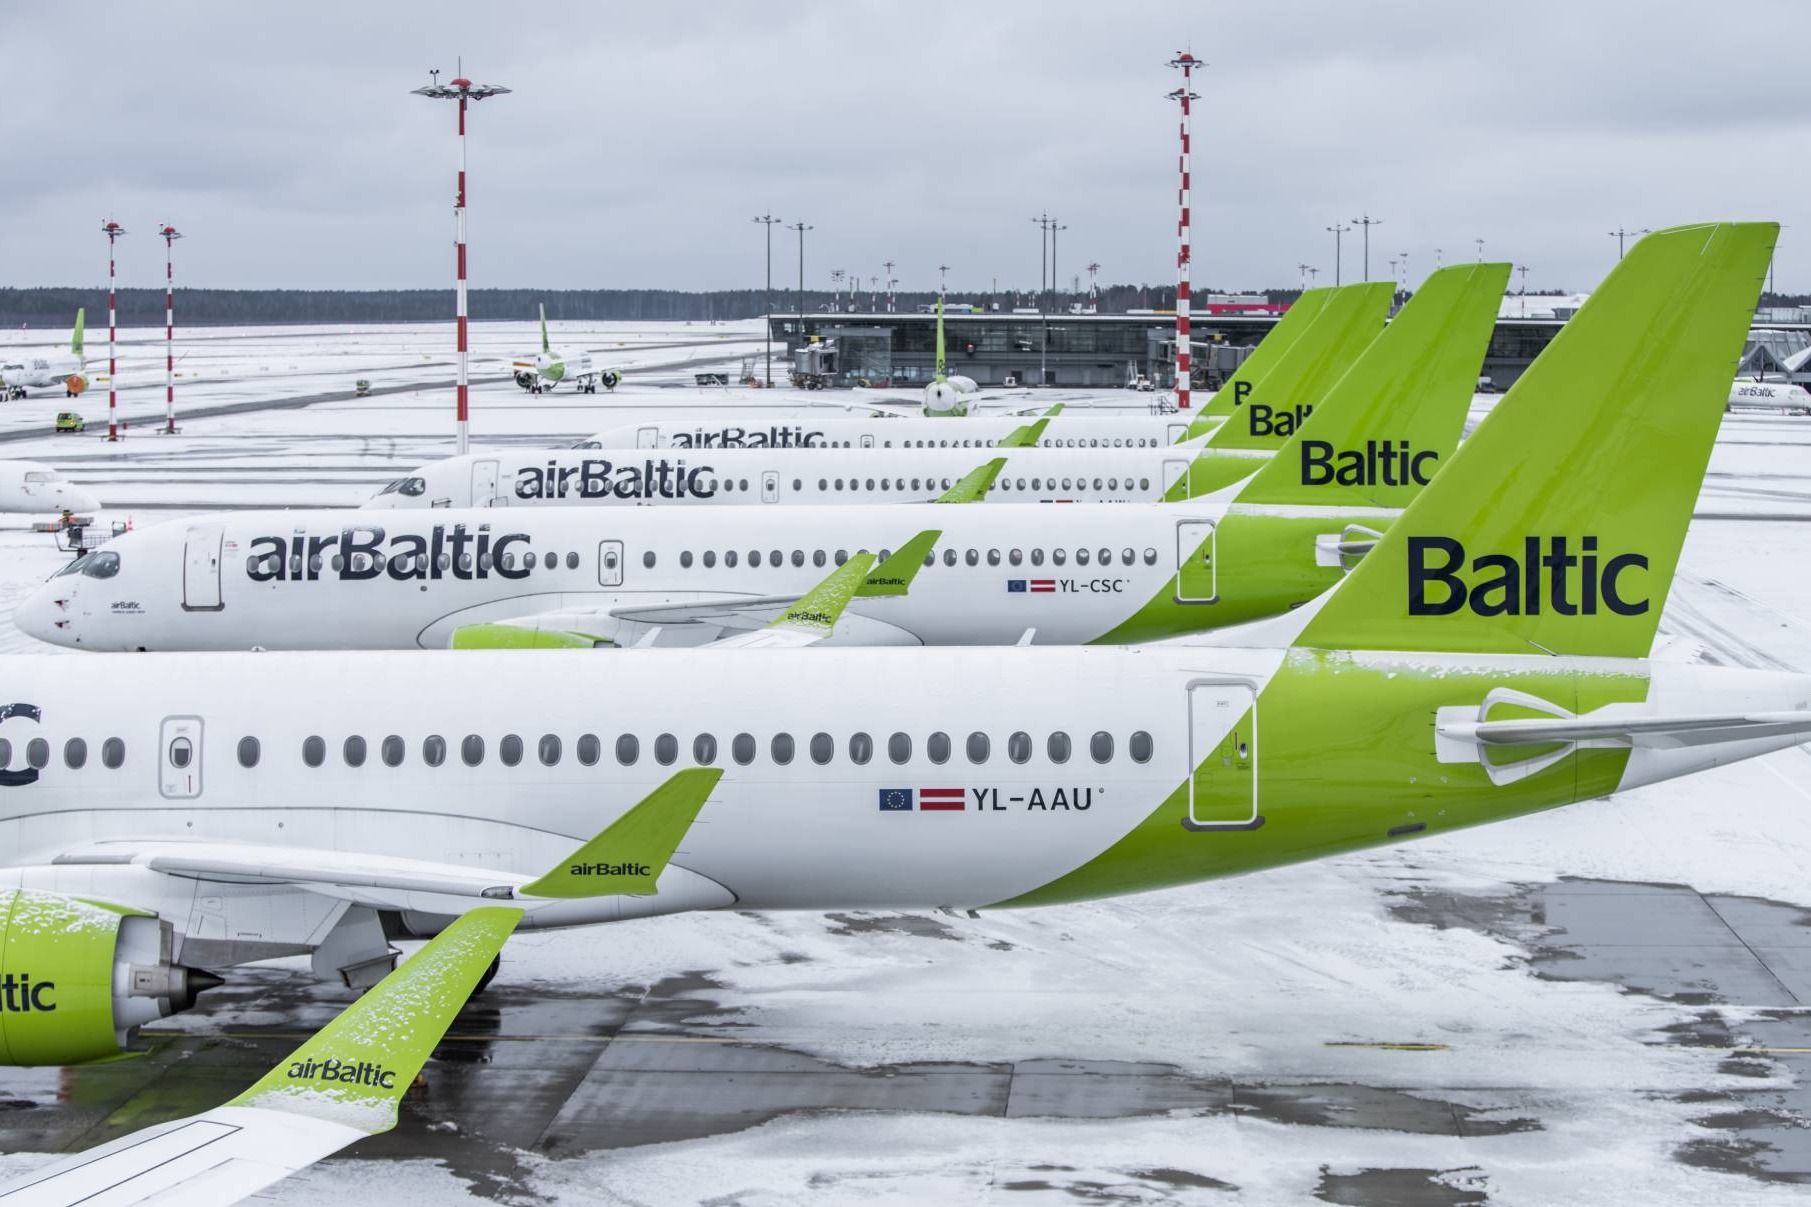 Several airBaltic aircraft parked side by side.